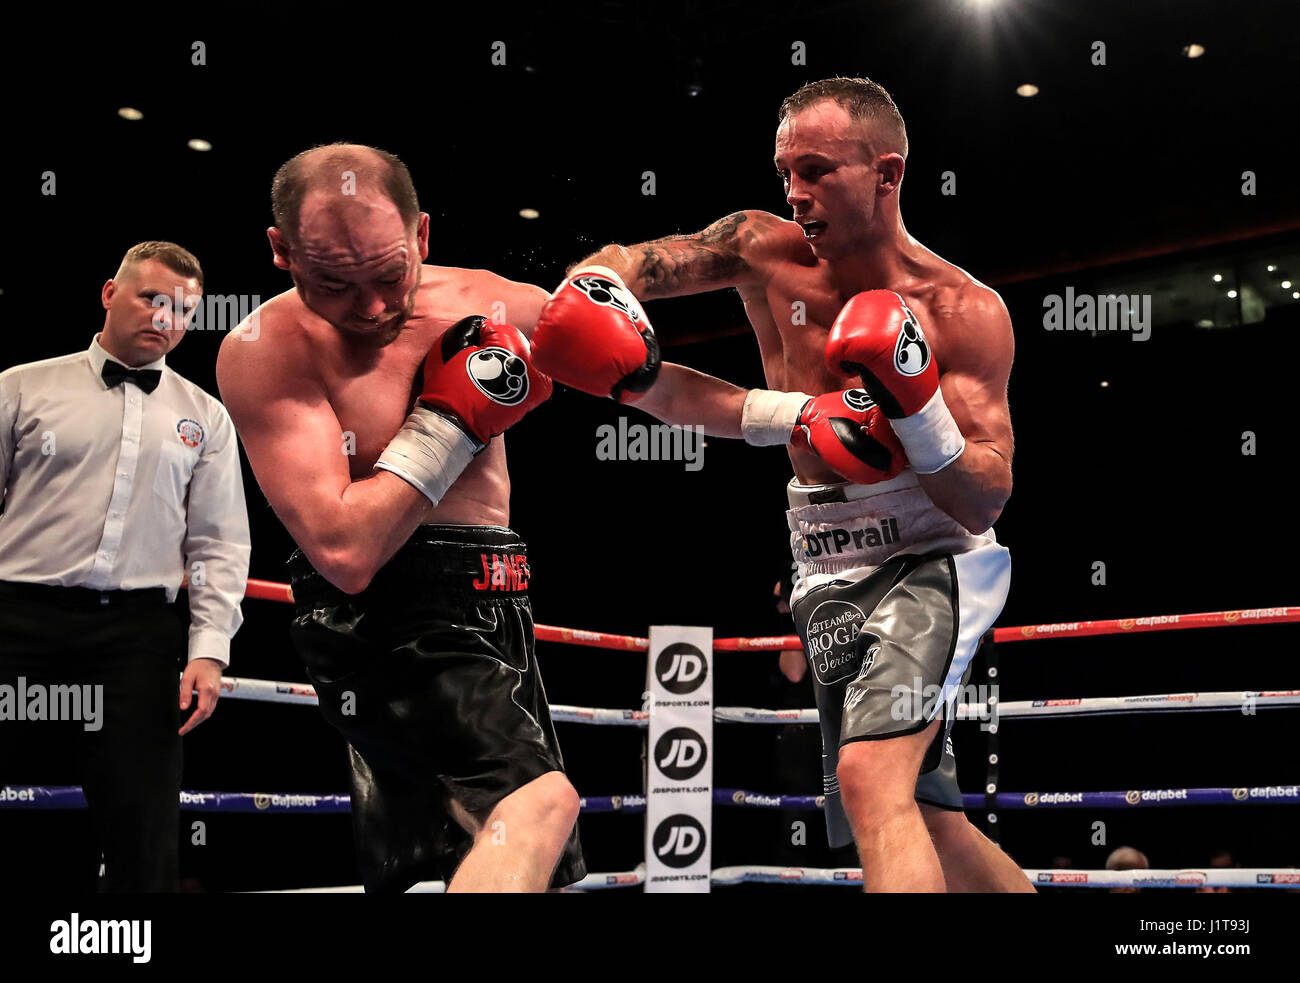 Steve Brogan (left) in action against Henry James in a Super-Lightweight contest at Liverpool Echo Arena. Stock Photo